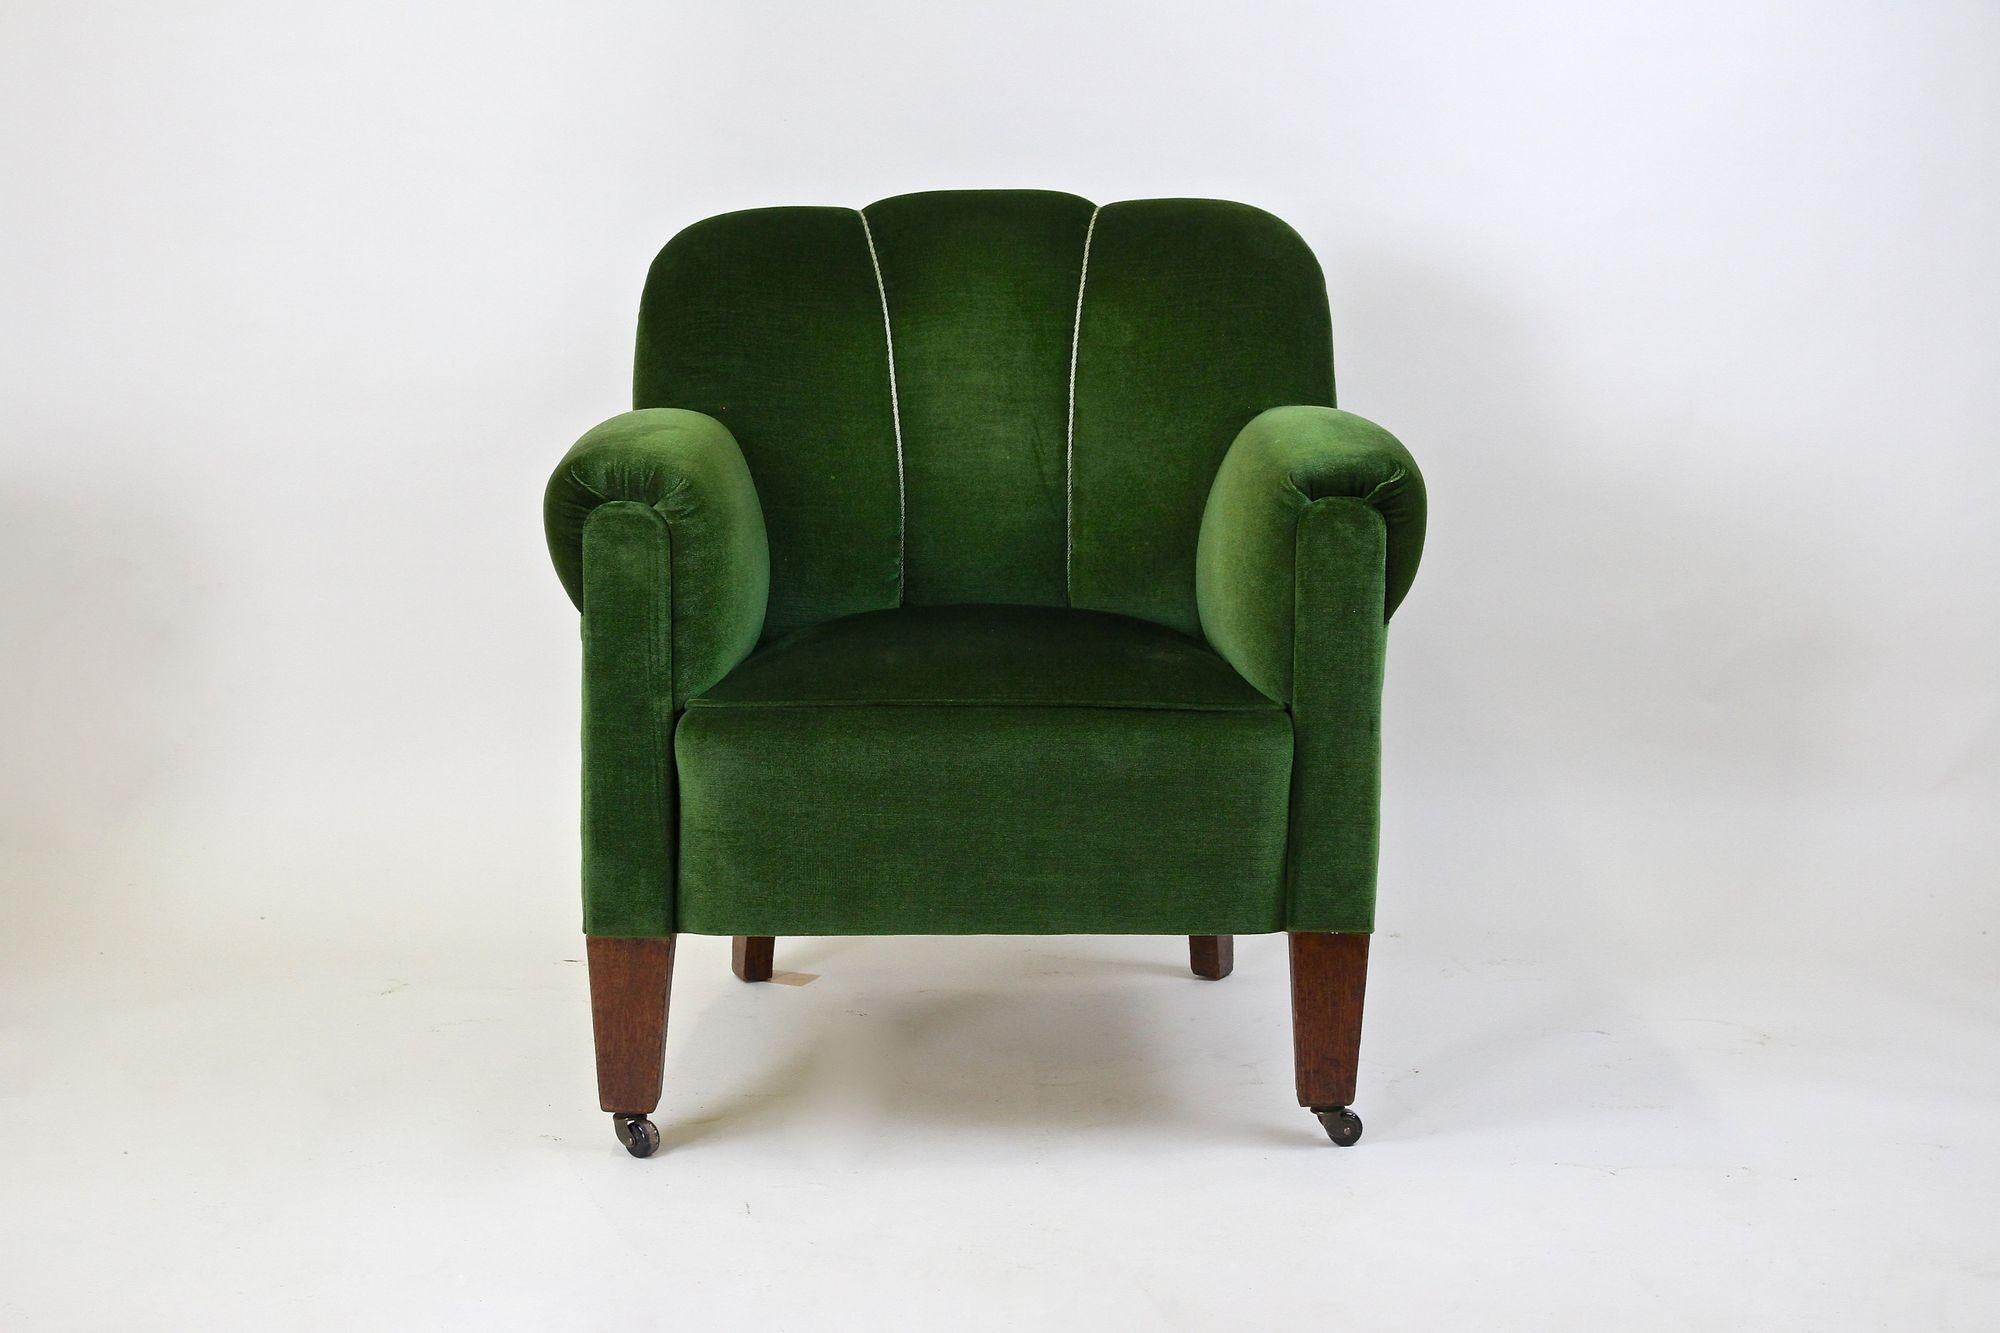 Sophisticated French Art Deco club armchair from the period around 1940. This unique lounge chair impresses with beautiful shaped lines and the still original, amazing looking green velvet upholstery. The velevet has been cleaned and is in fantastic